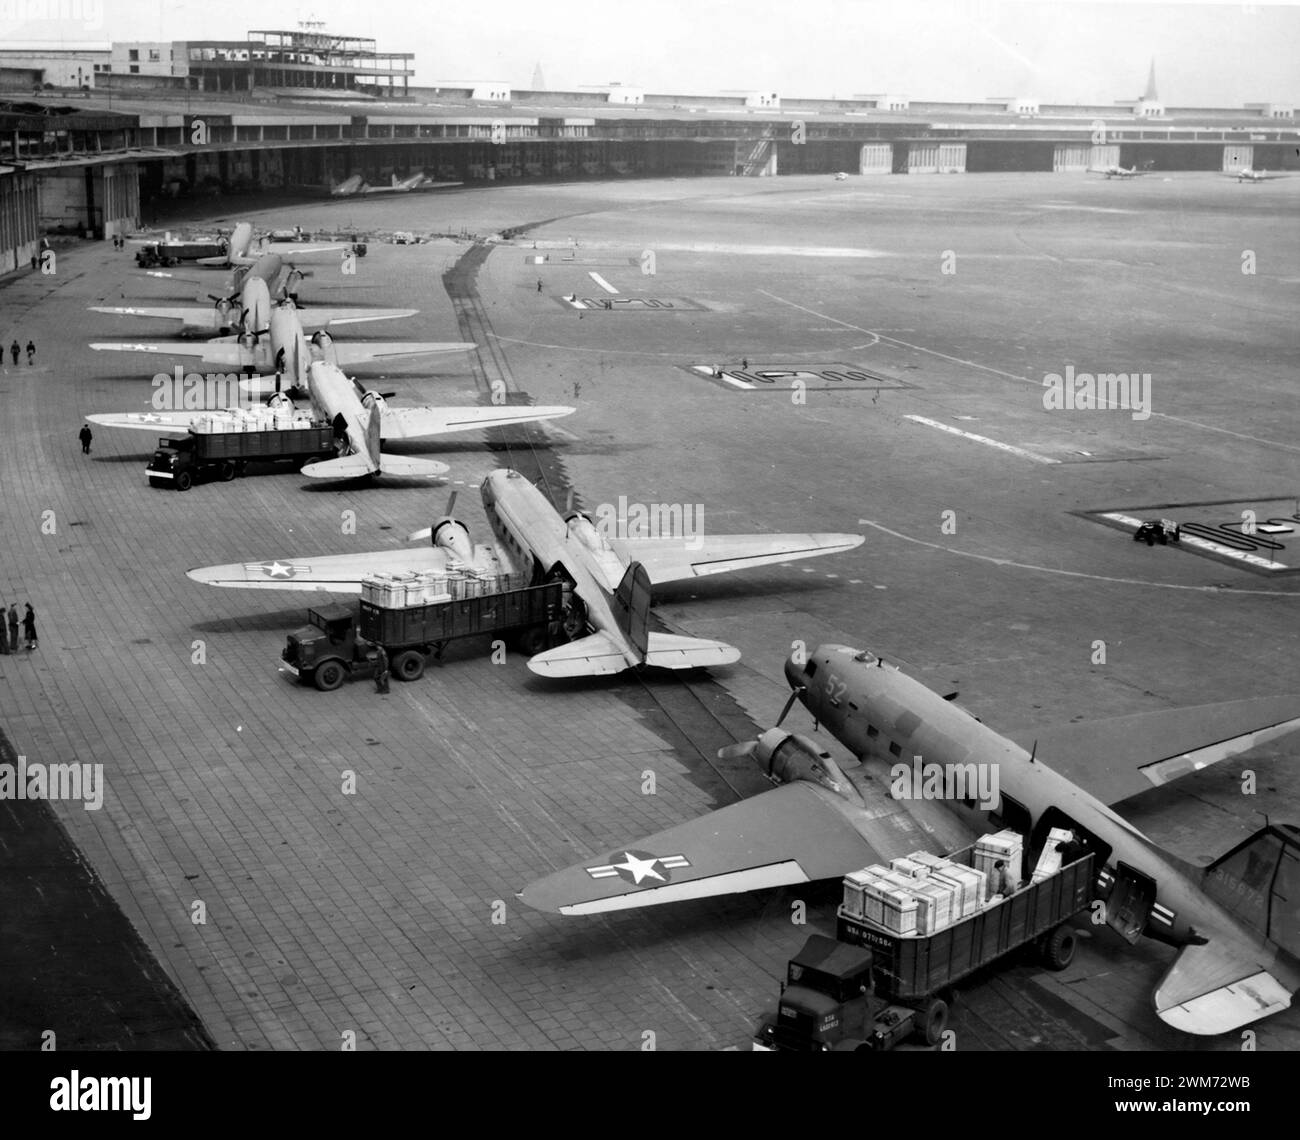 Berlin Airlift. U.S. Navy Douglas R4D and U.S. Air Force C-47 aircraft unload at Tempelhof Airport during the Berlin Airlift. The Berlin Blockade lasted from the 24 June 1948 to 12 May 1949. Stock Photo